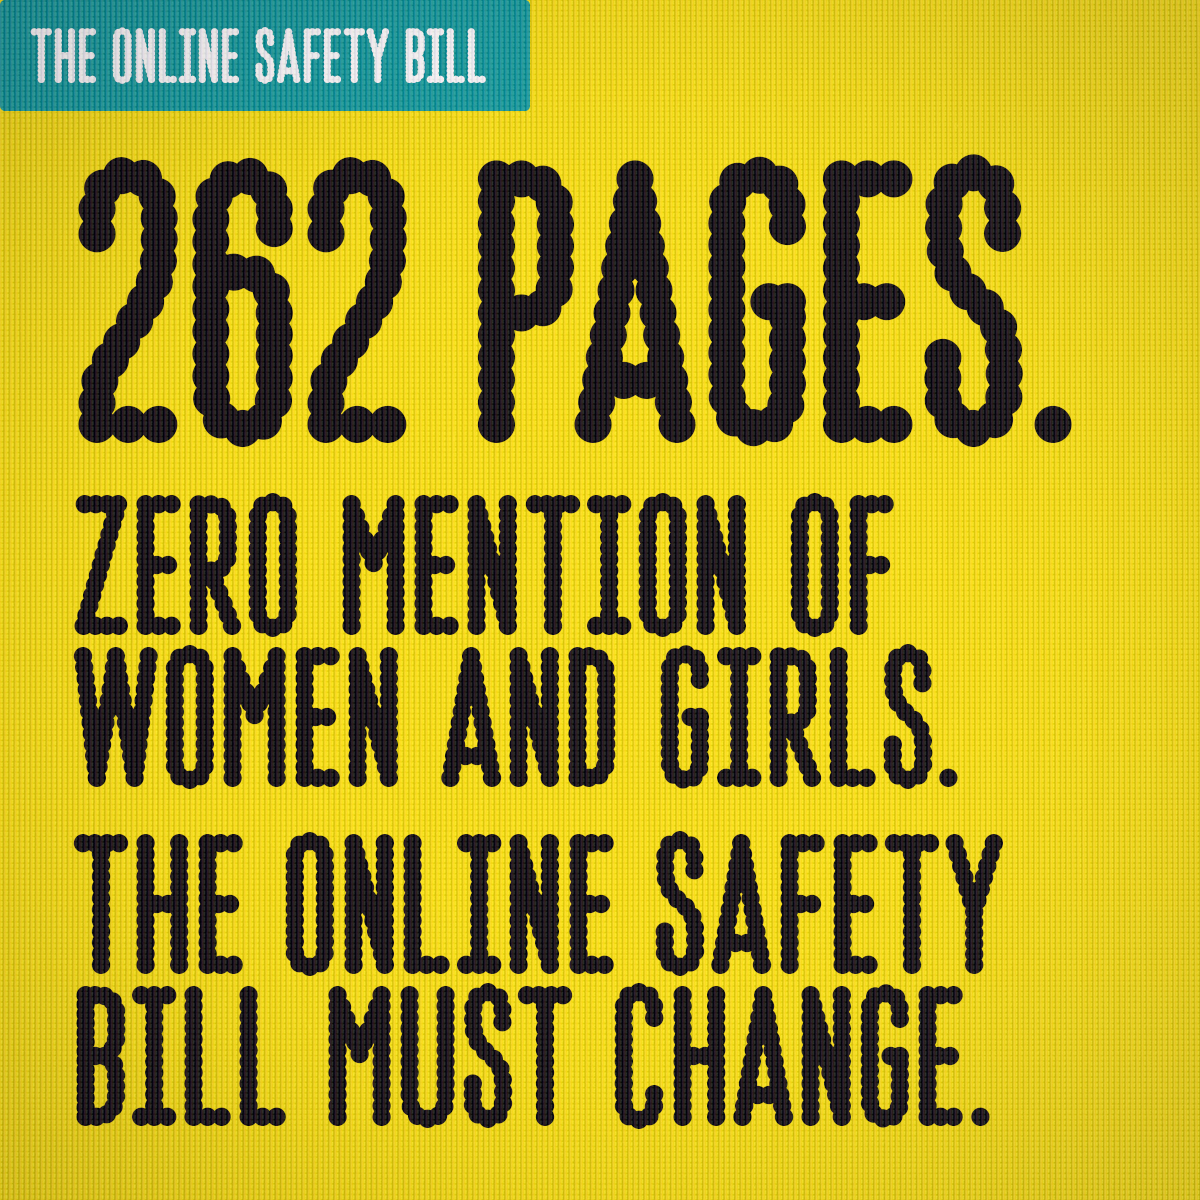 The #OnlineSafetyBill was designed to make the internet safer. But if women and girls are to be protected from abuse online, it must be amended! #MakeItSafer for women and girls online. Visit ee.co.uk/hopeunited to find out how